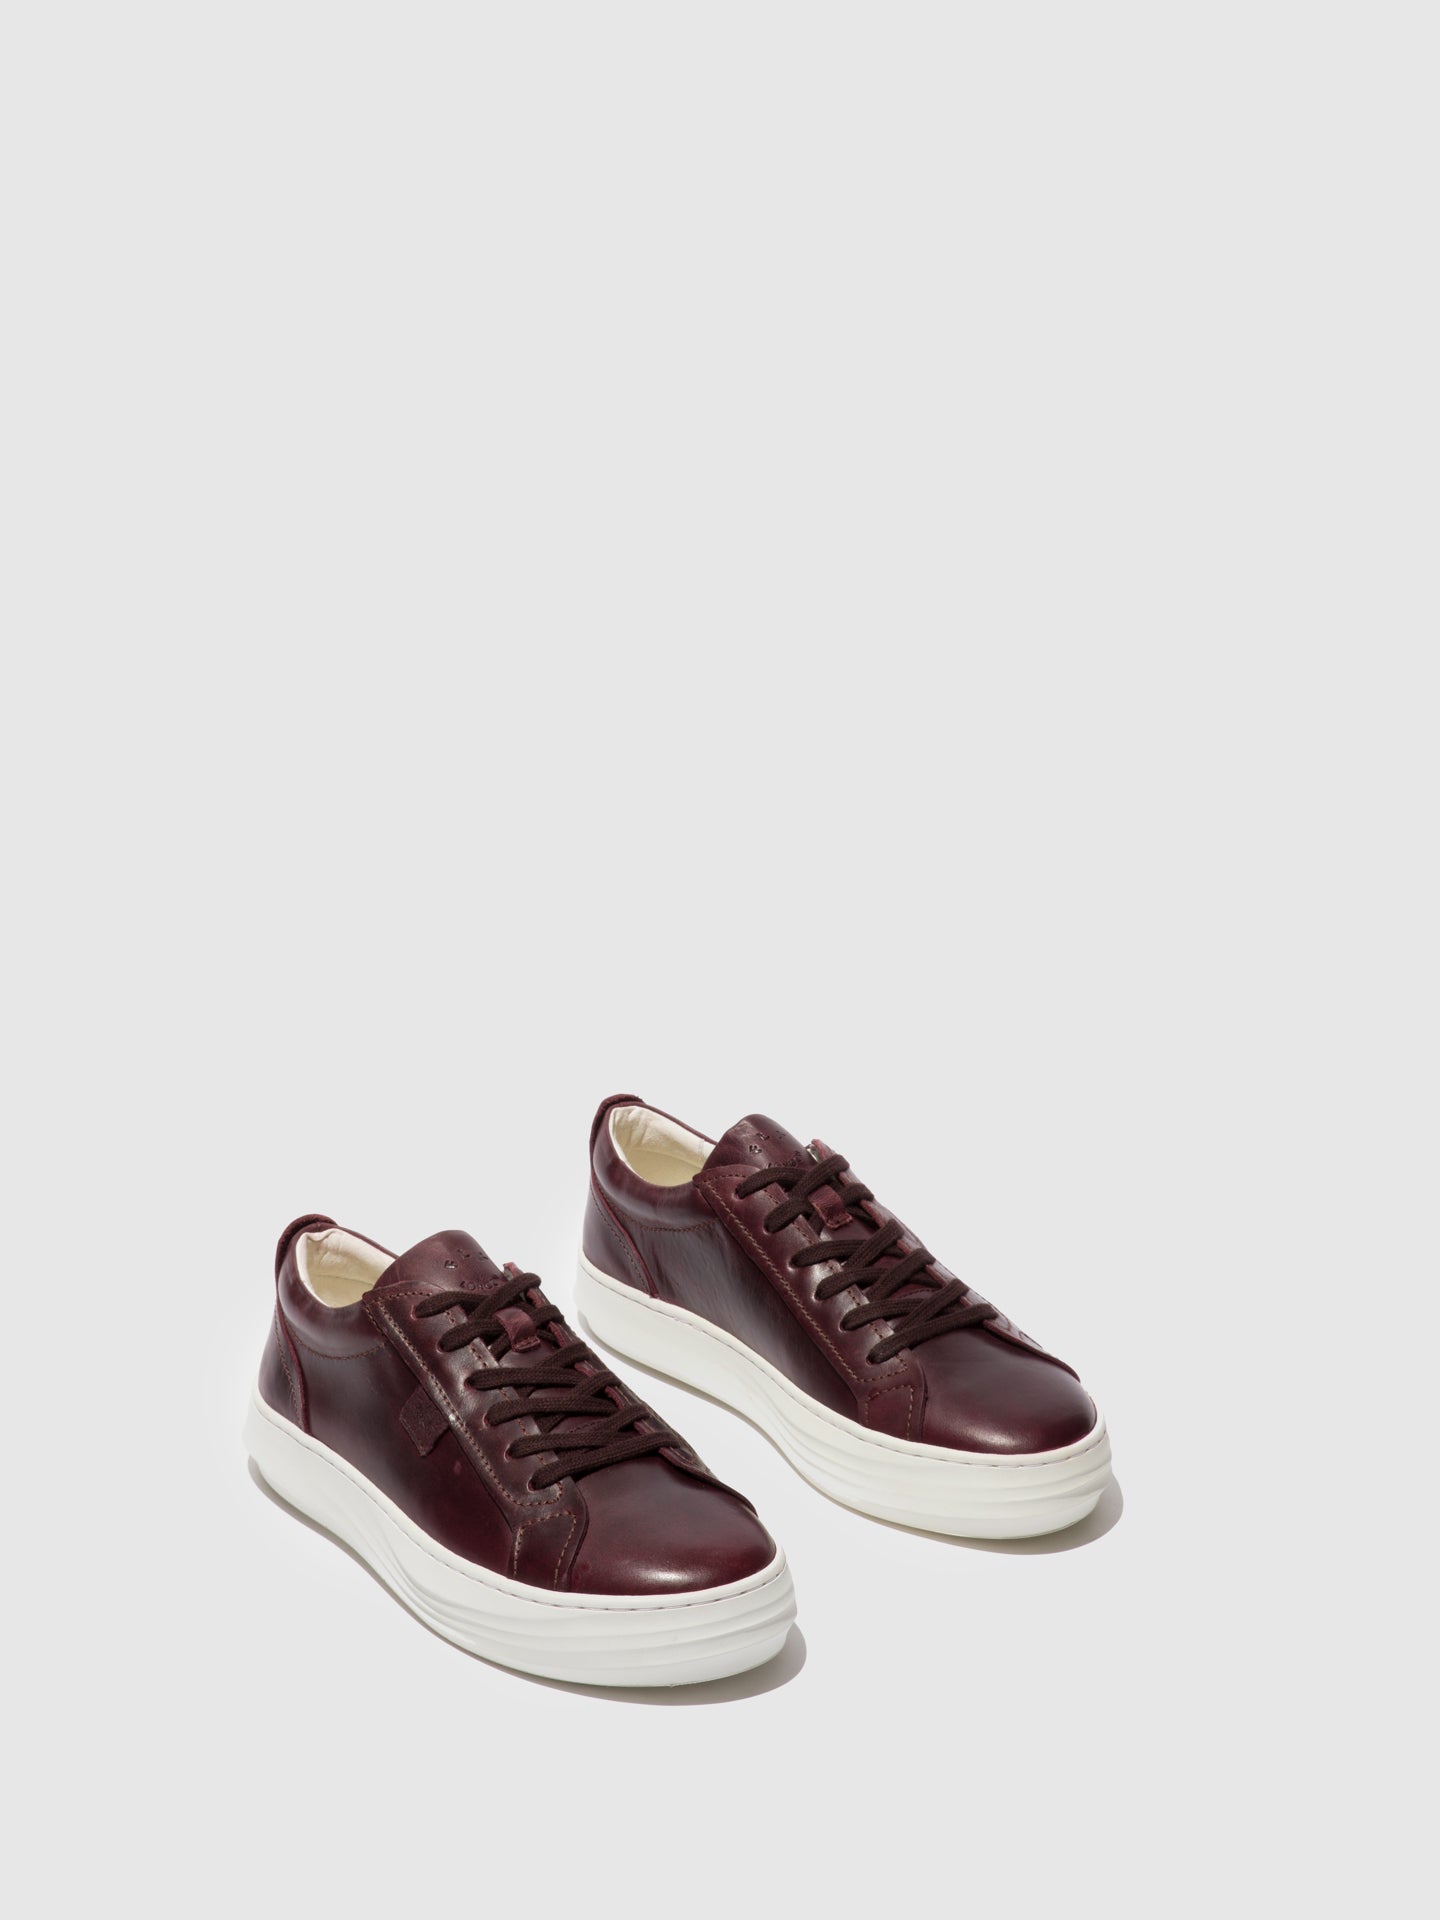 Fly London Lace-up Trainers CIVE424FLY RUG WINE